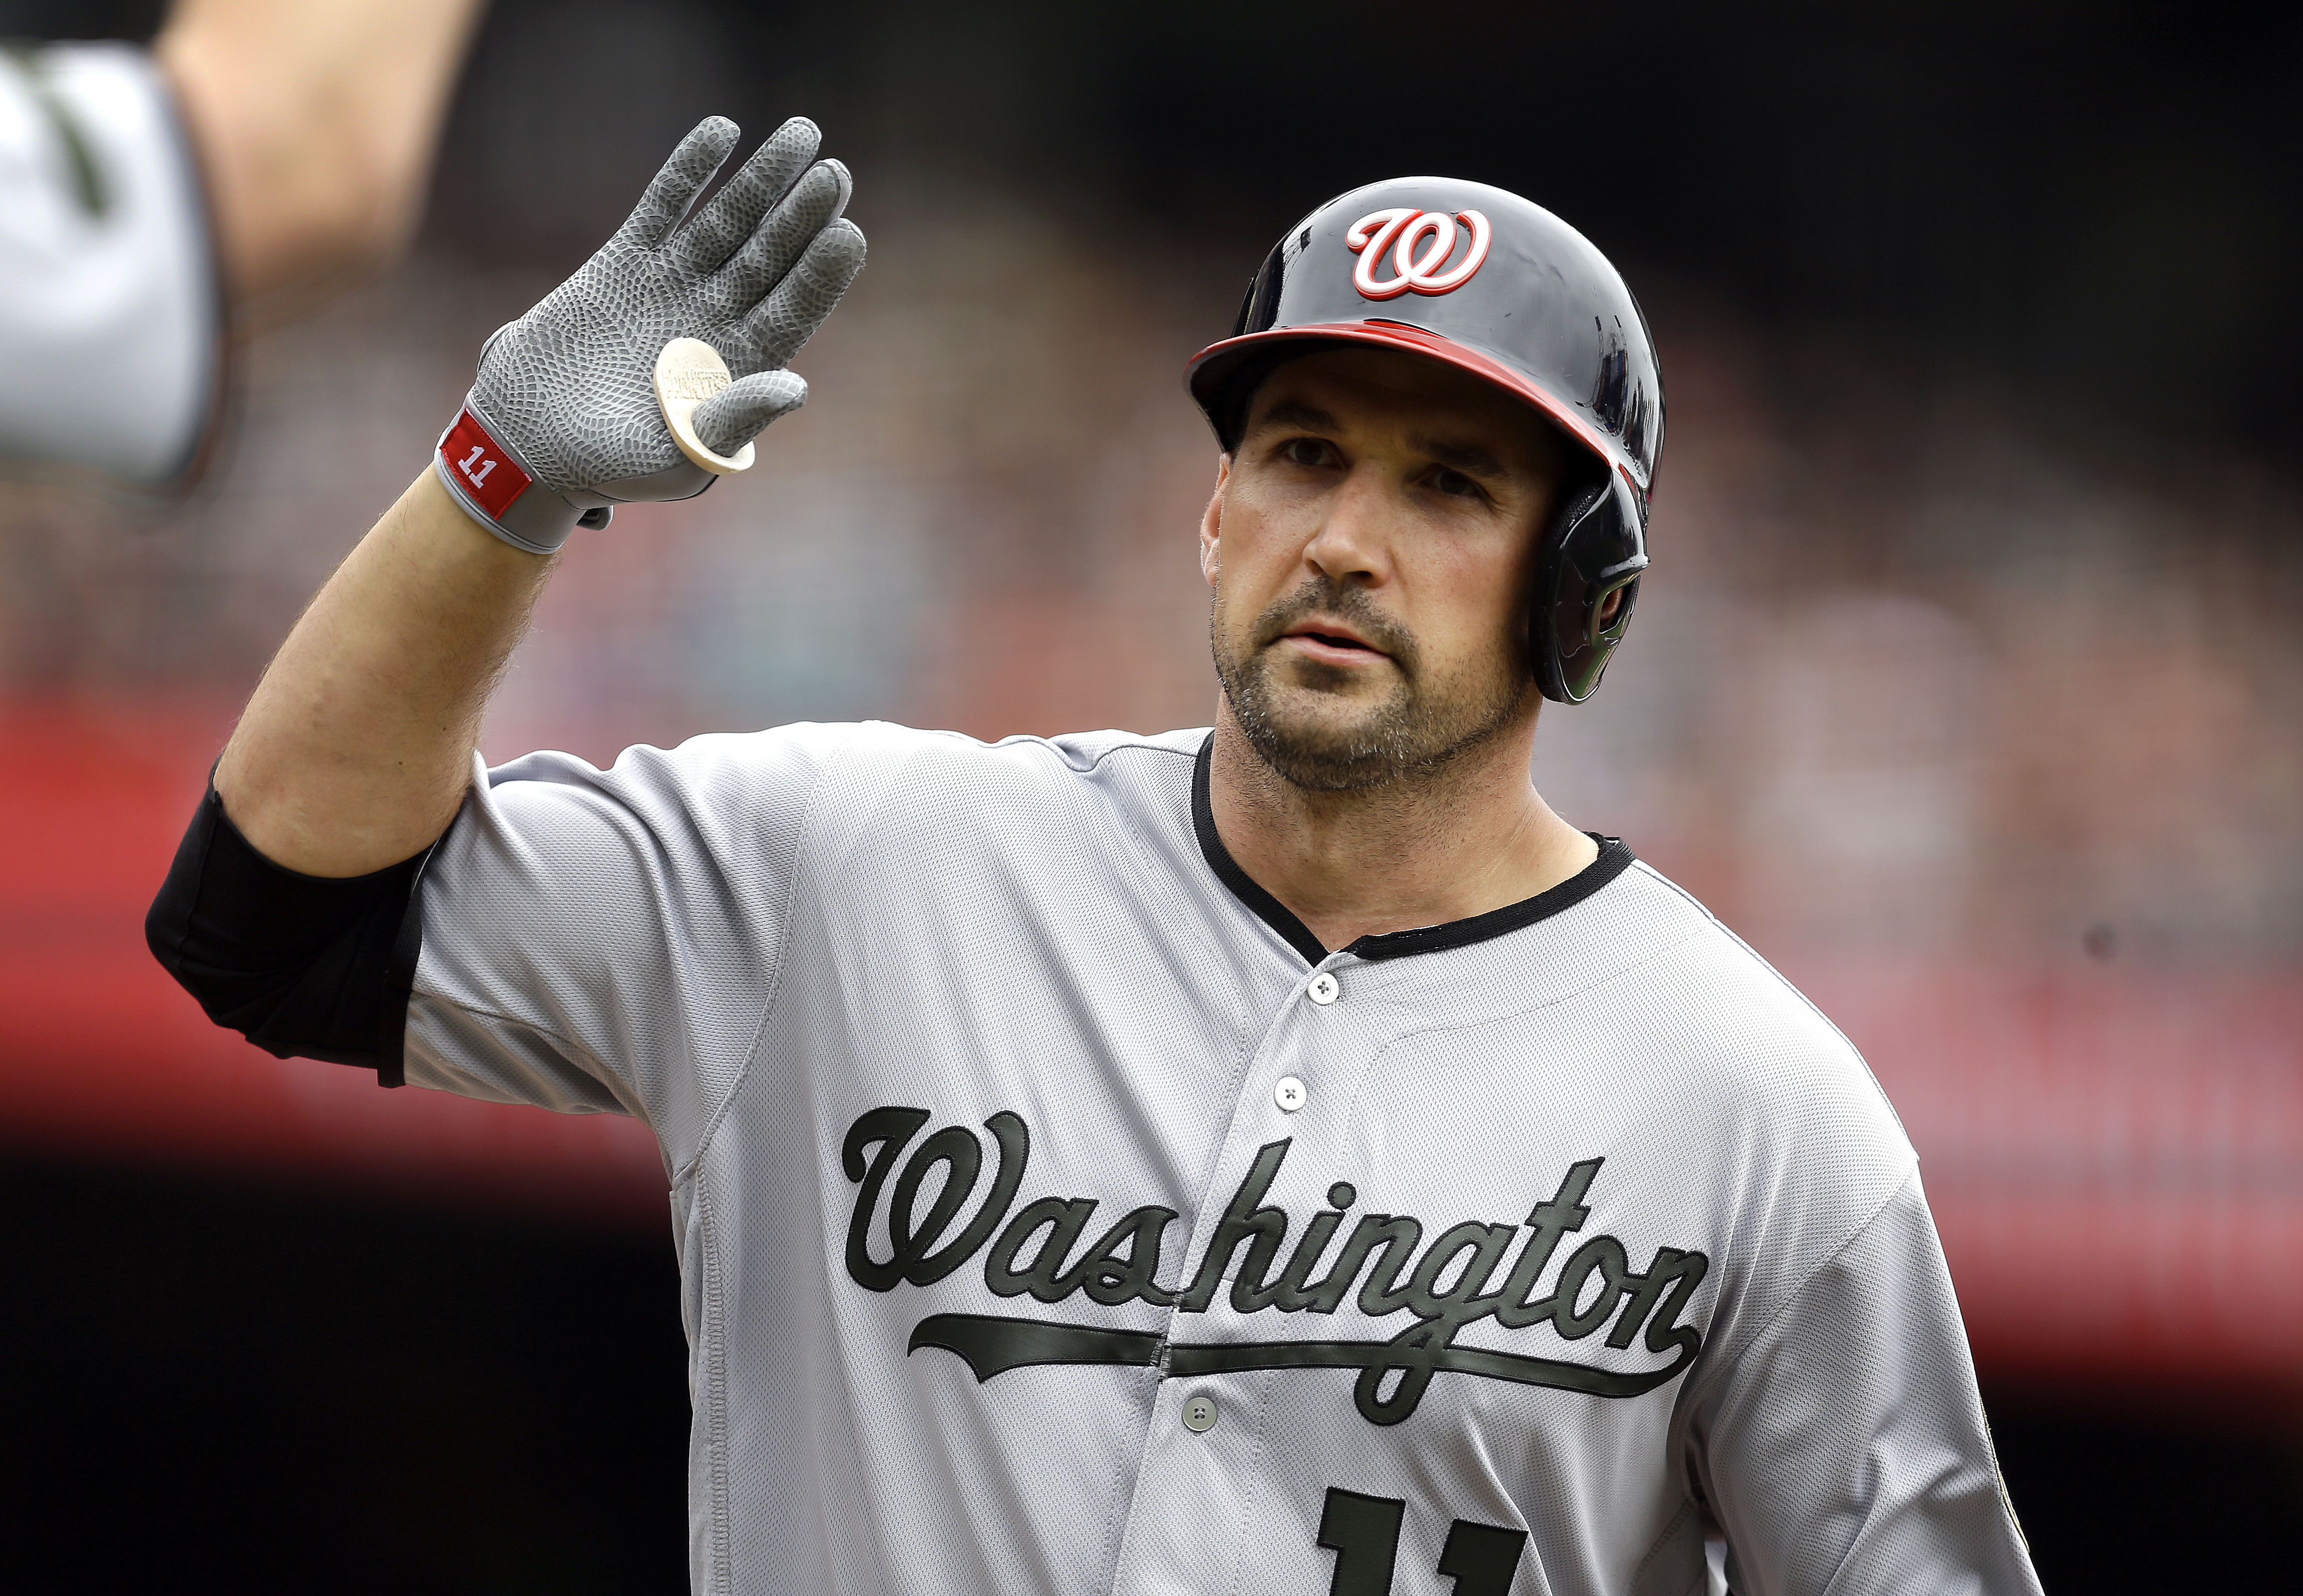 Ryan Zimmerman's suit against Al Jazeera could be heading for settlement